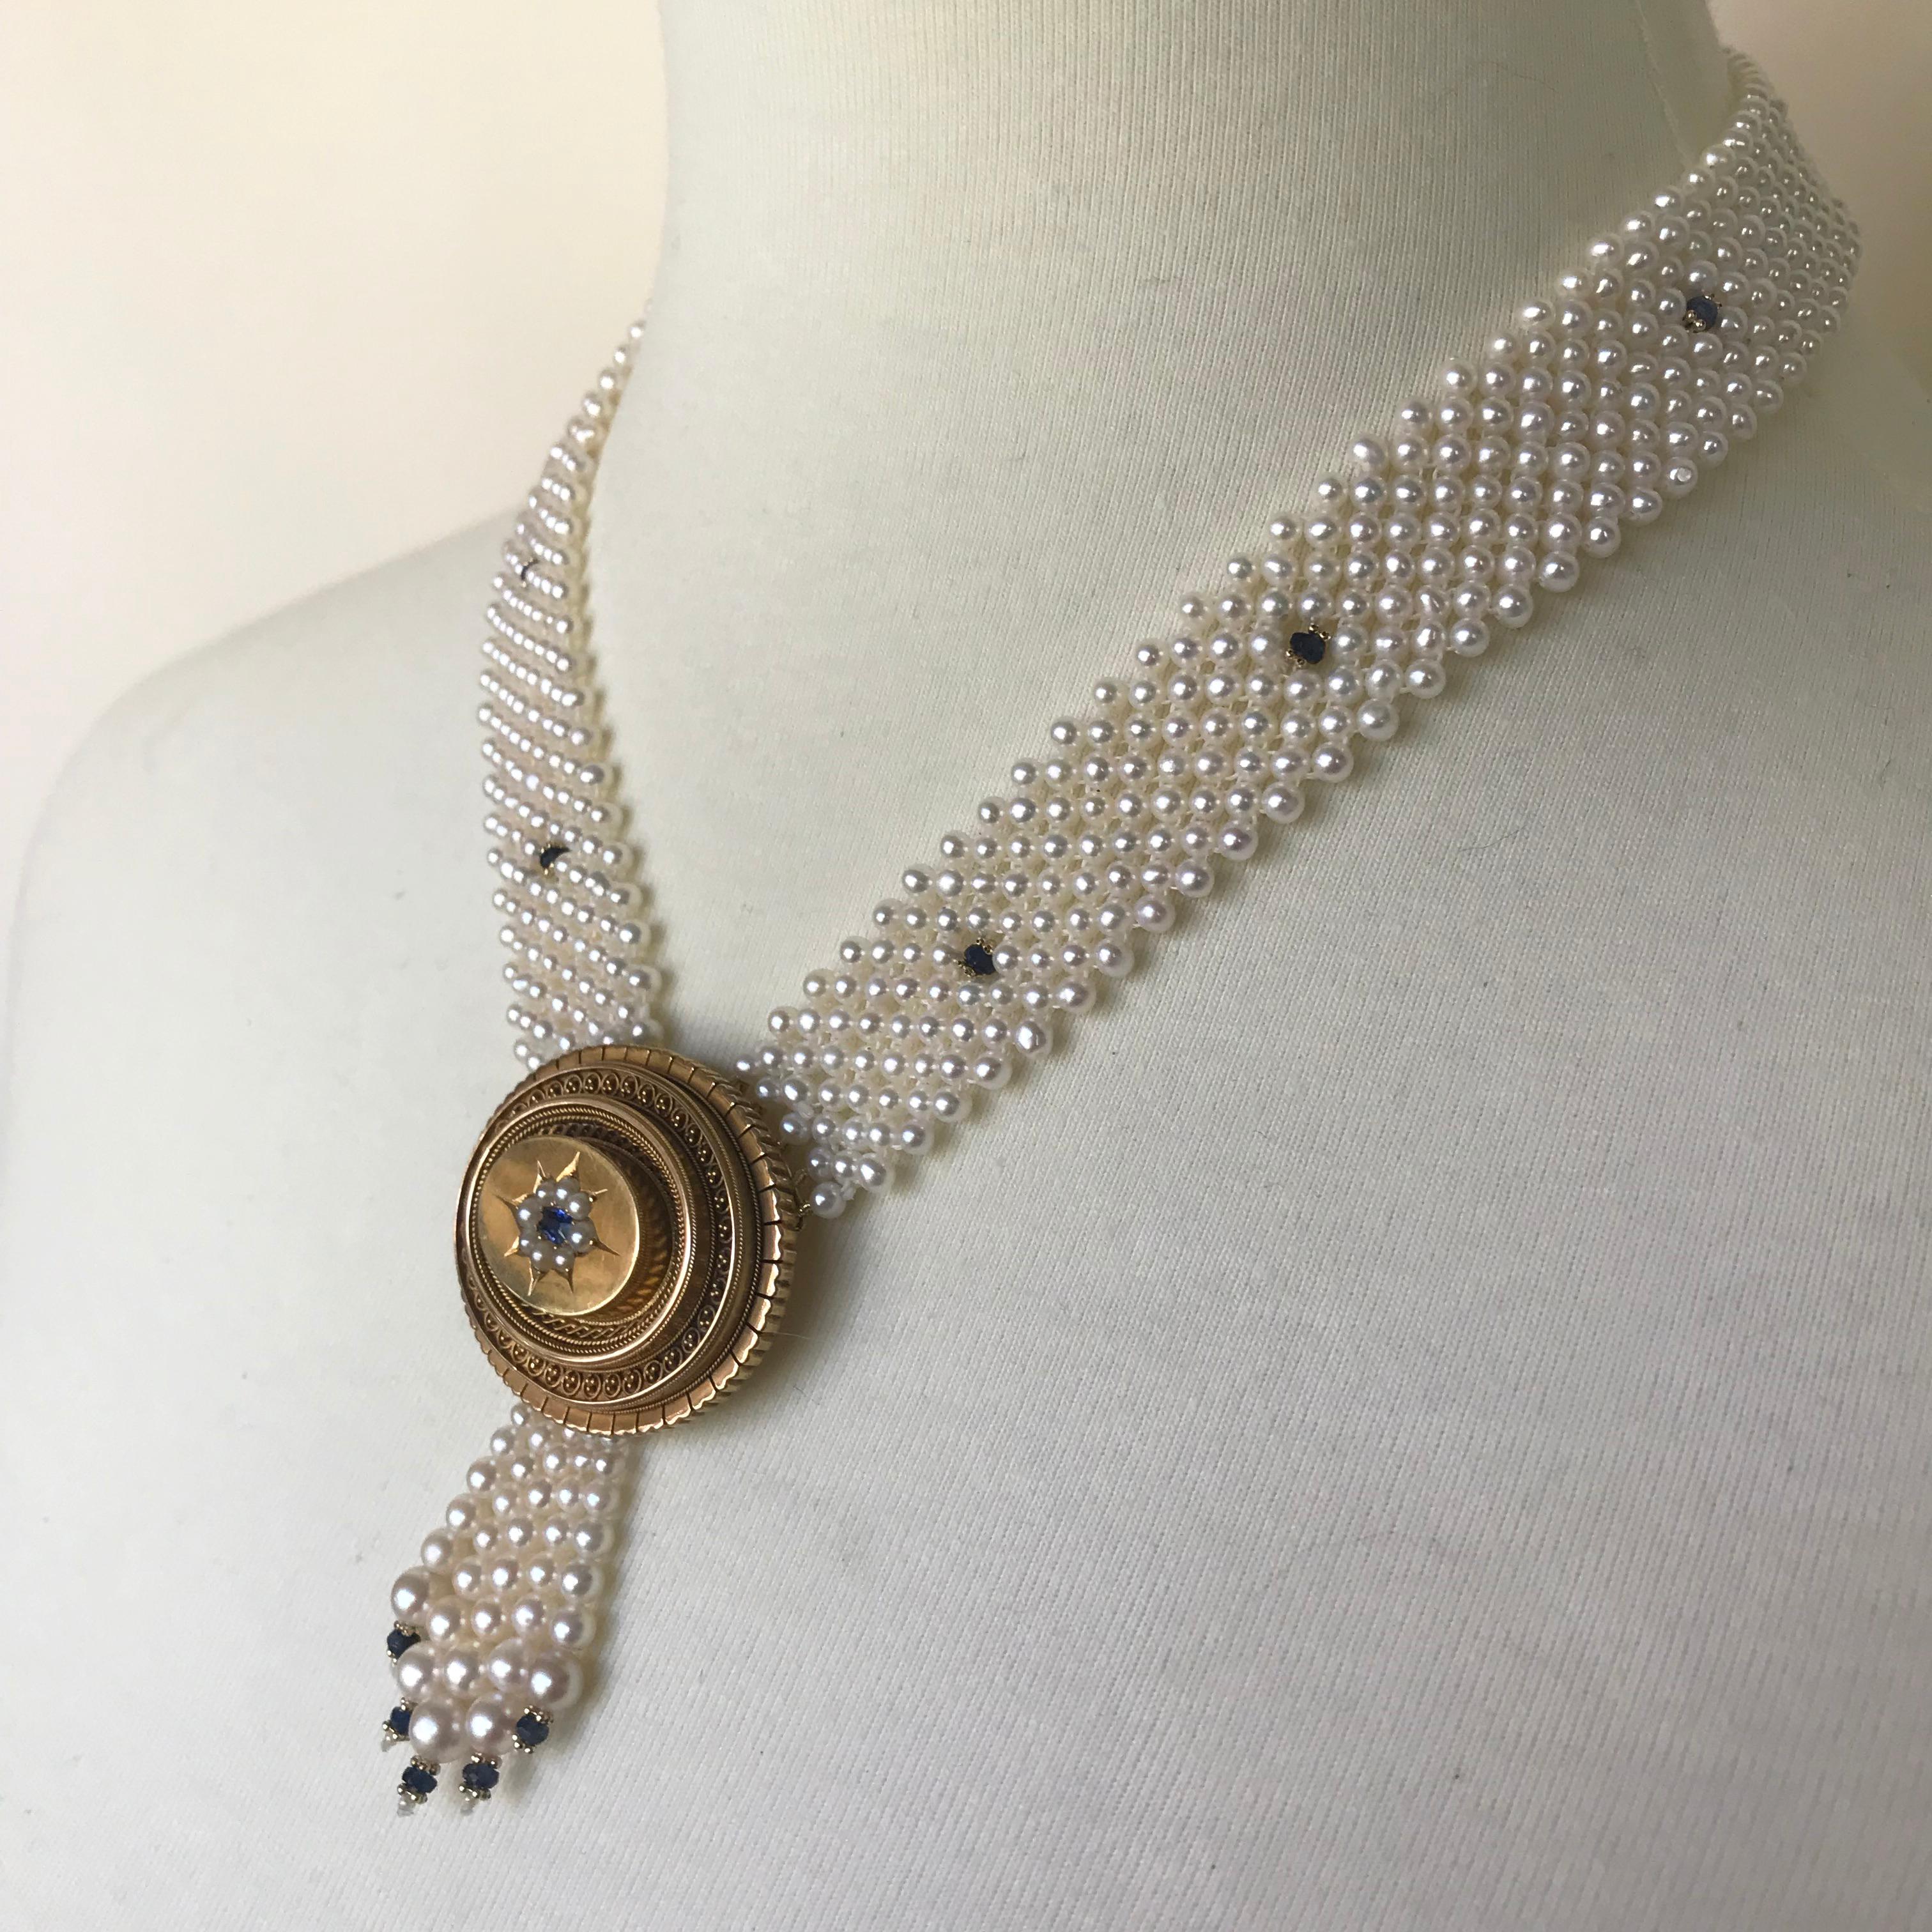 Marina J.'s inspiration for this piece was the beautiful English Victorian vintage brooch that evokes the beautiful and elegant English woman. The necklace is handwoven and the pearls were handpicked by Marina J. herself. The pearl necklace is one